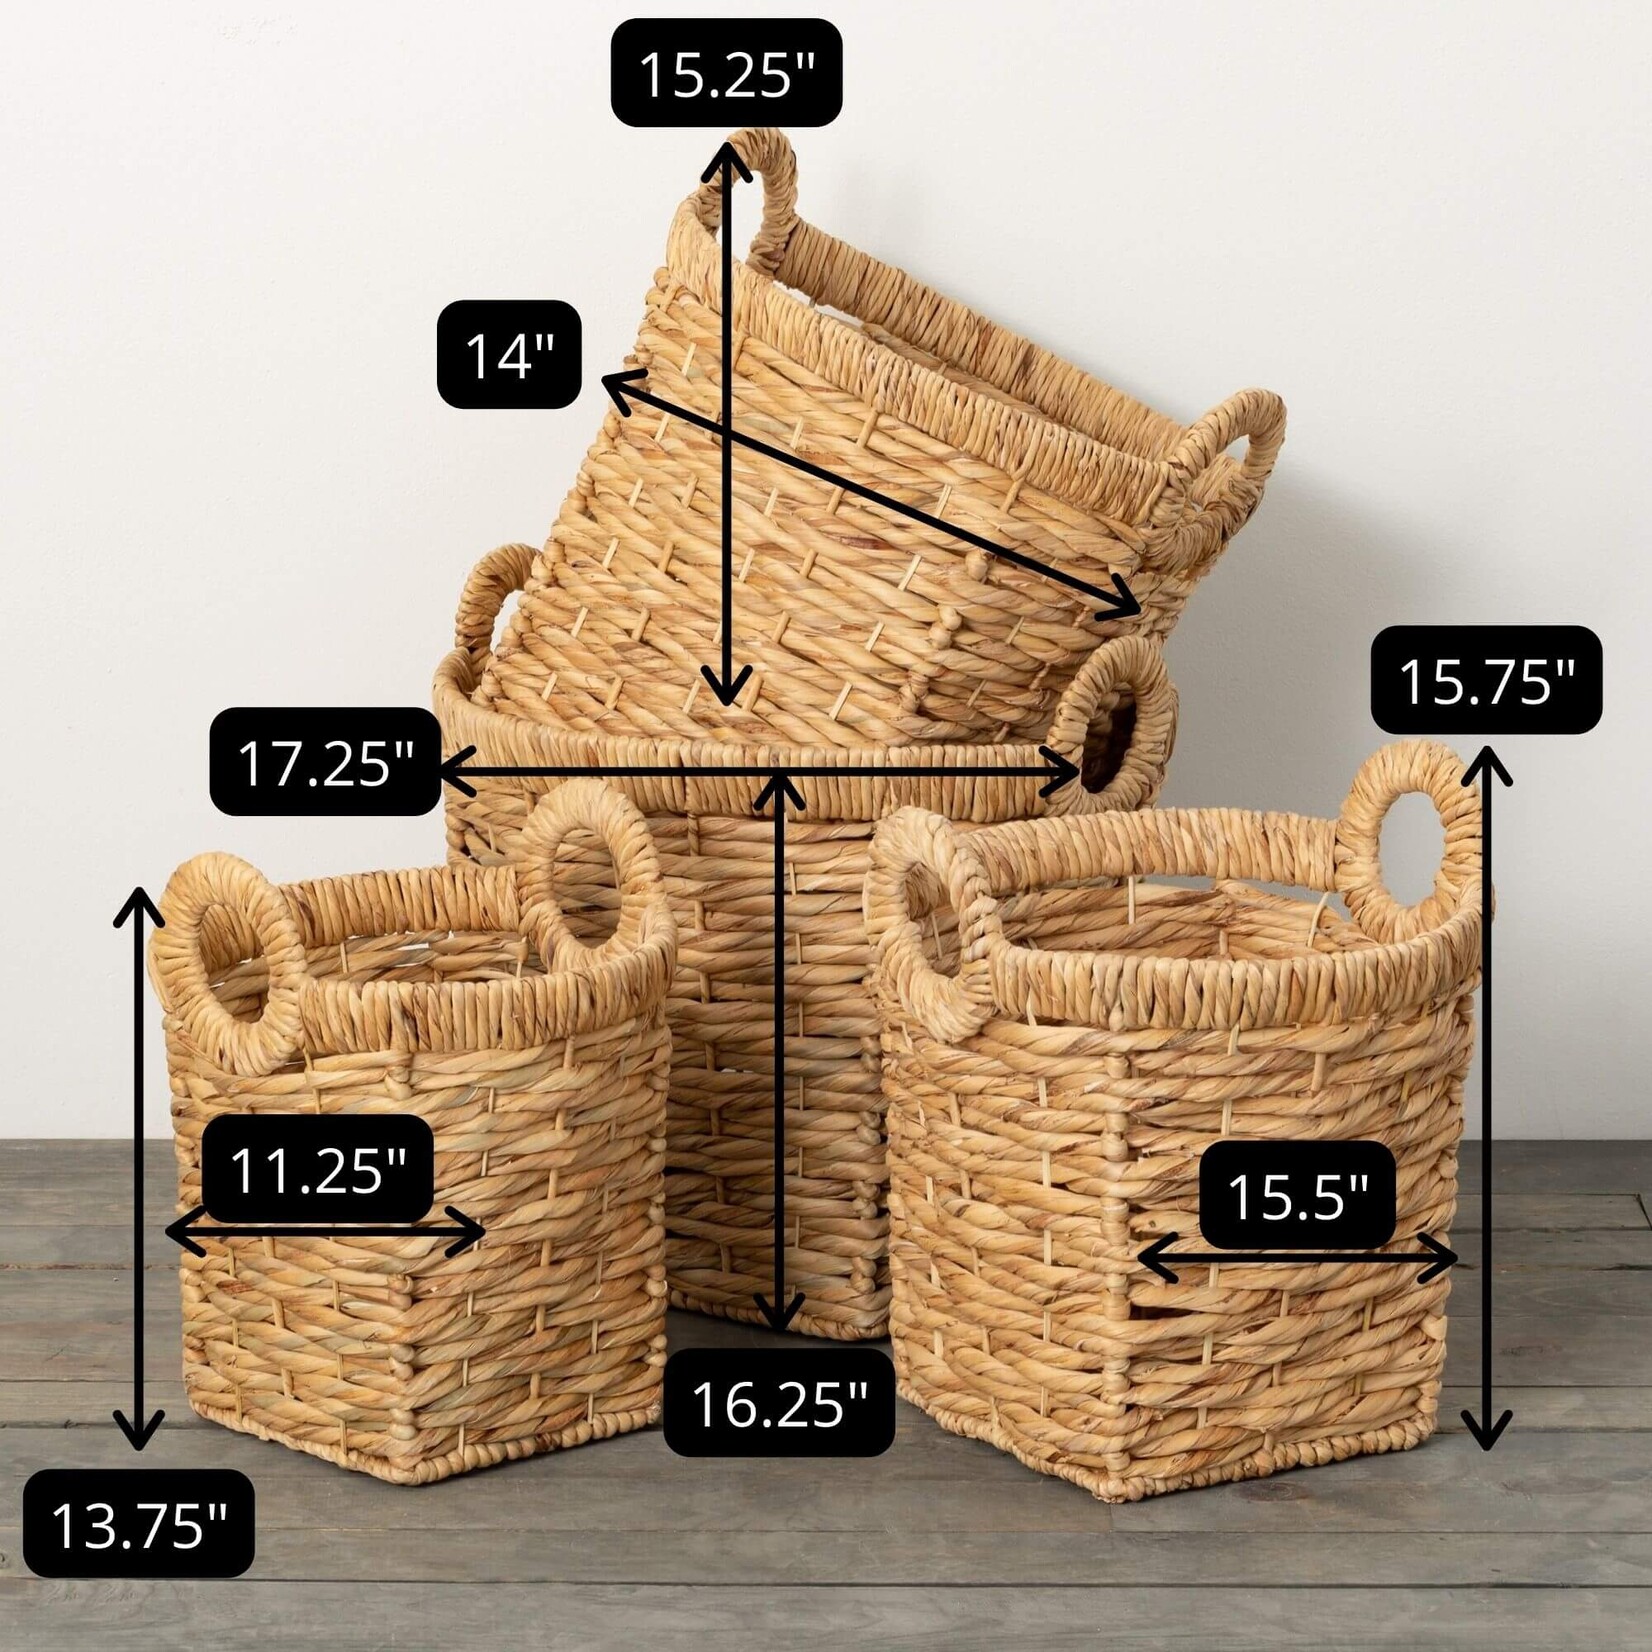 Natural Woven Basket With Handles, 13.75"